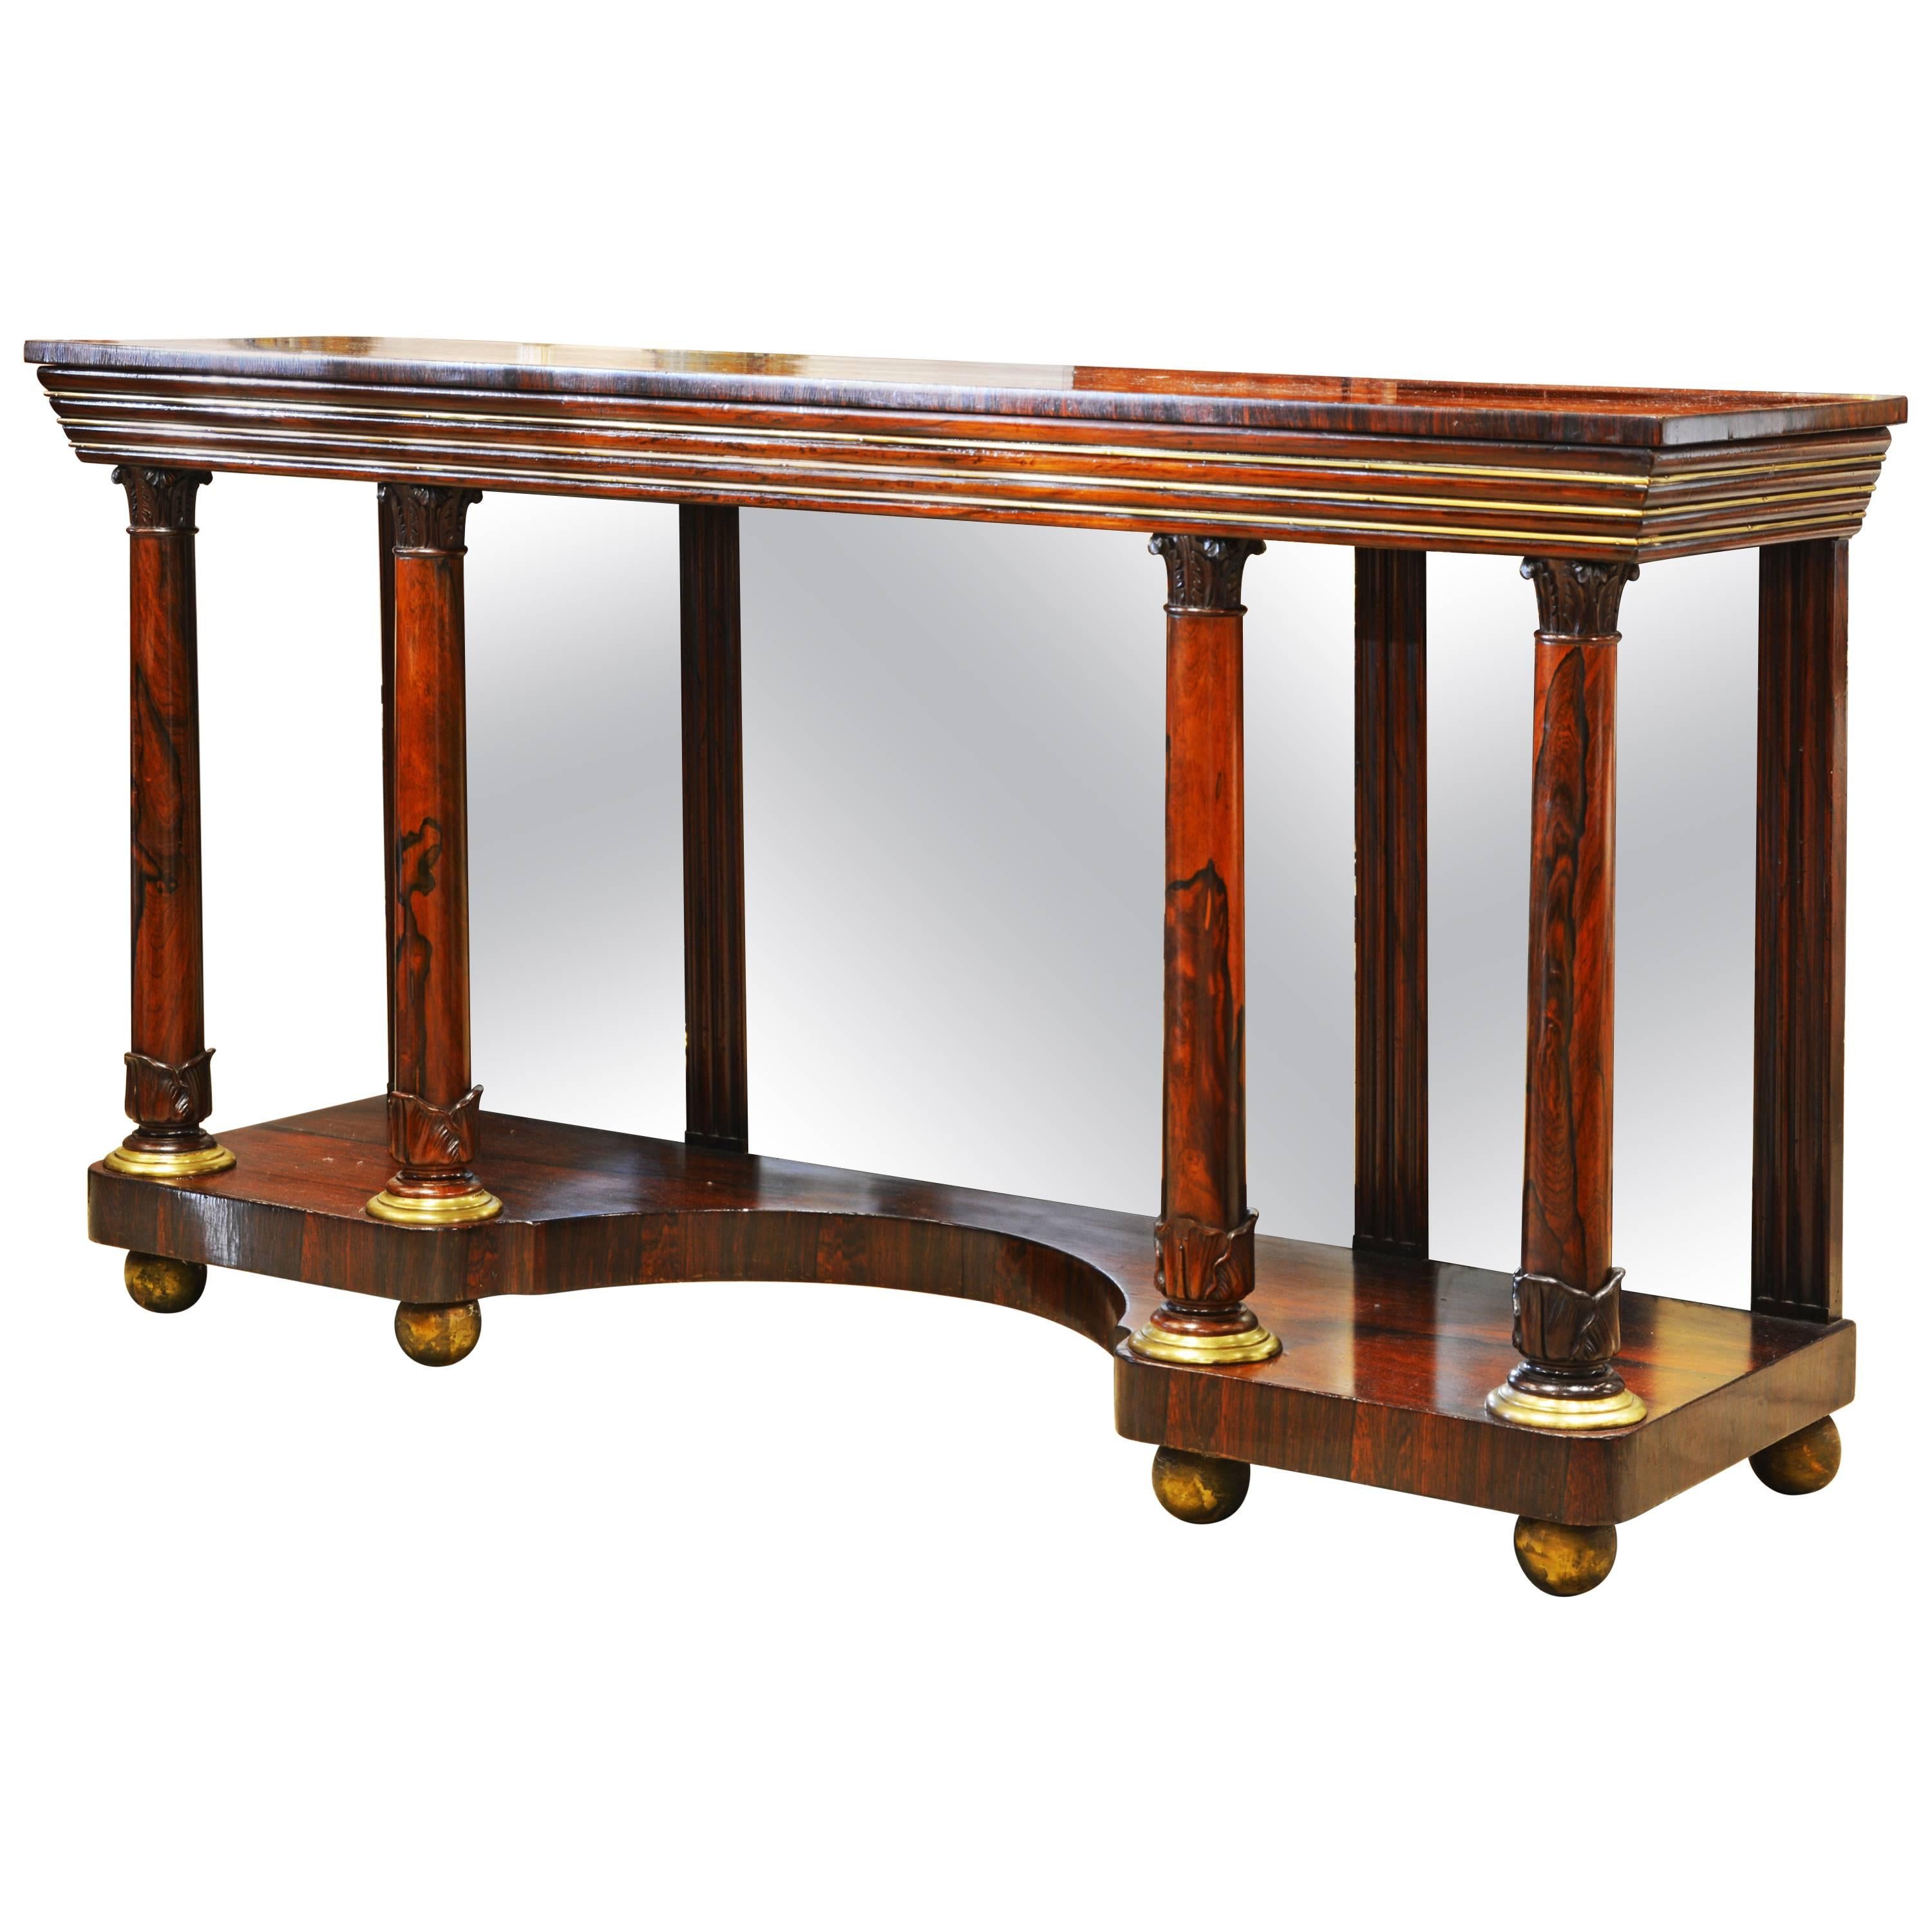 Noble English 19th Century Rosewood, Brass Trimmed and Mirrored Console Table